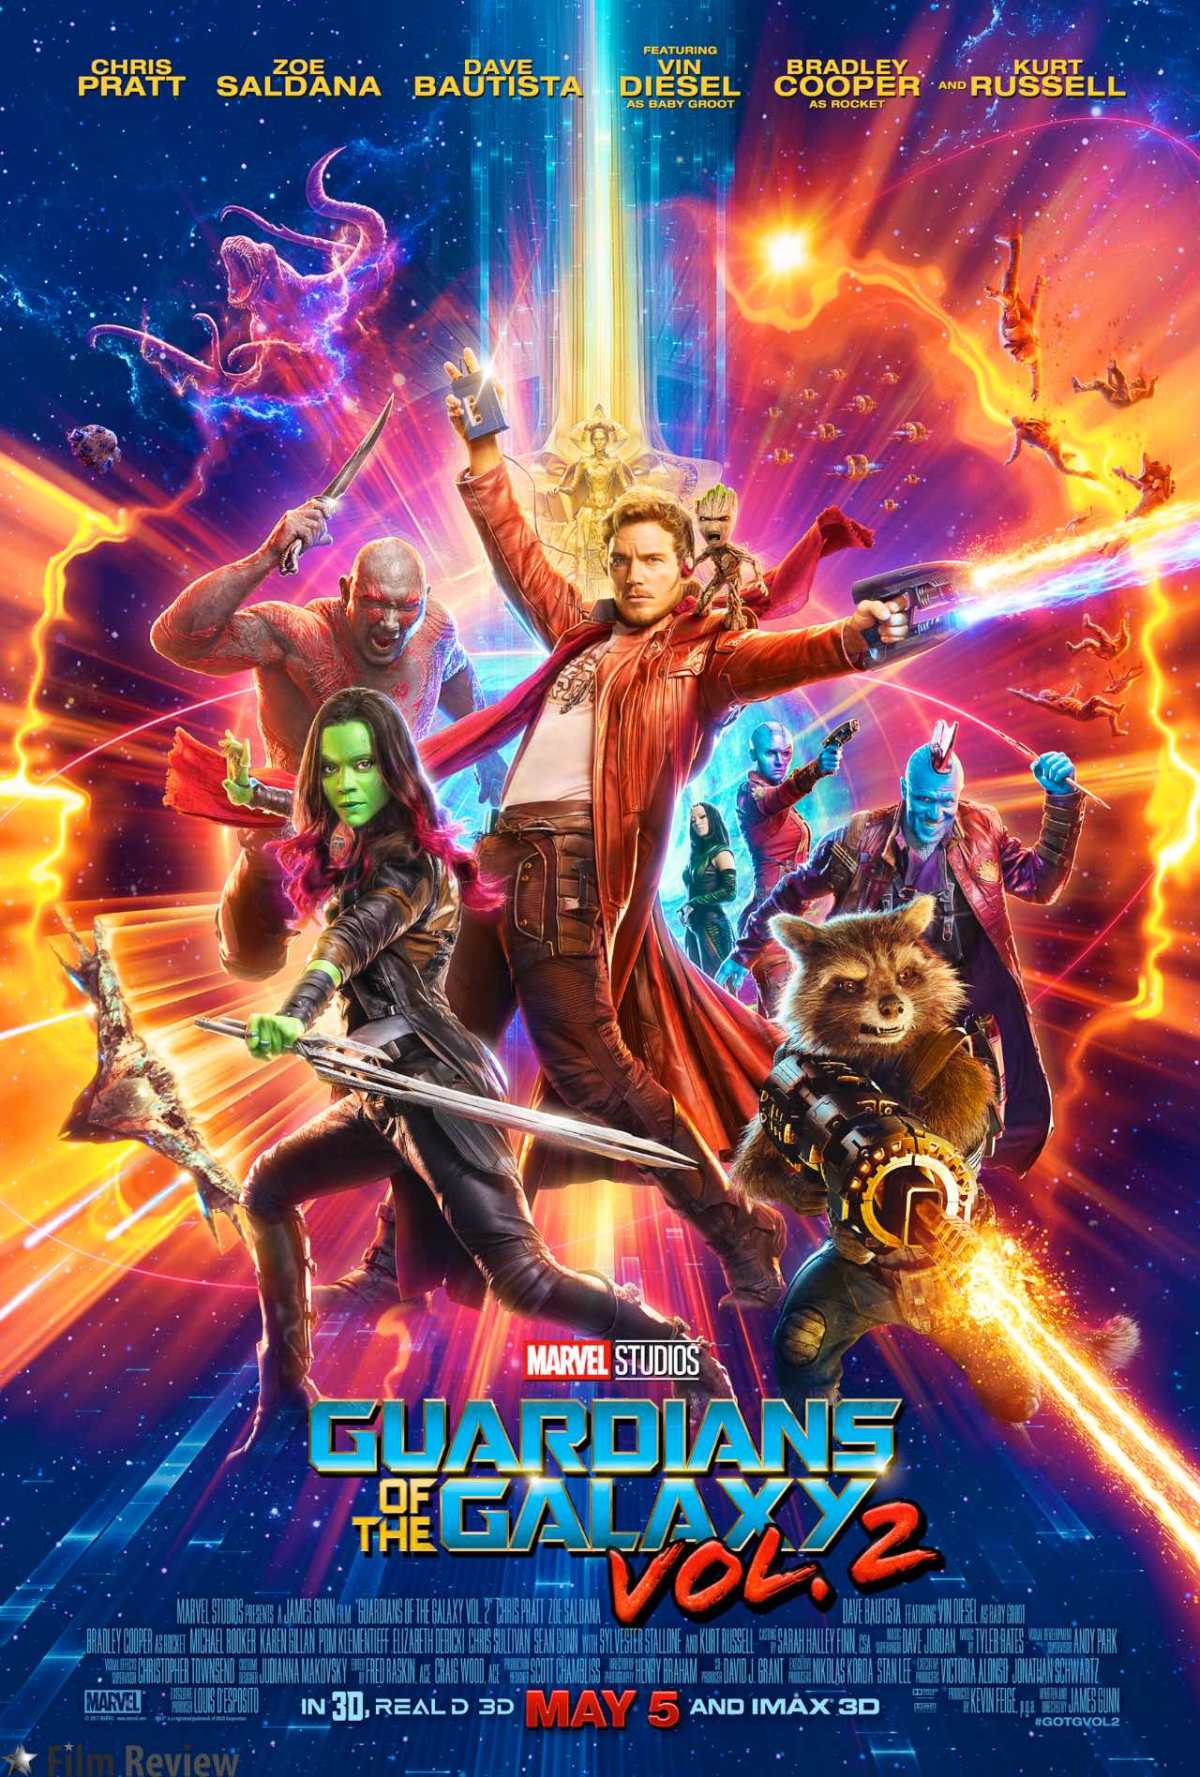 Guardians of the Galaxy vol. 2 Movie Review